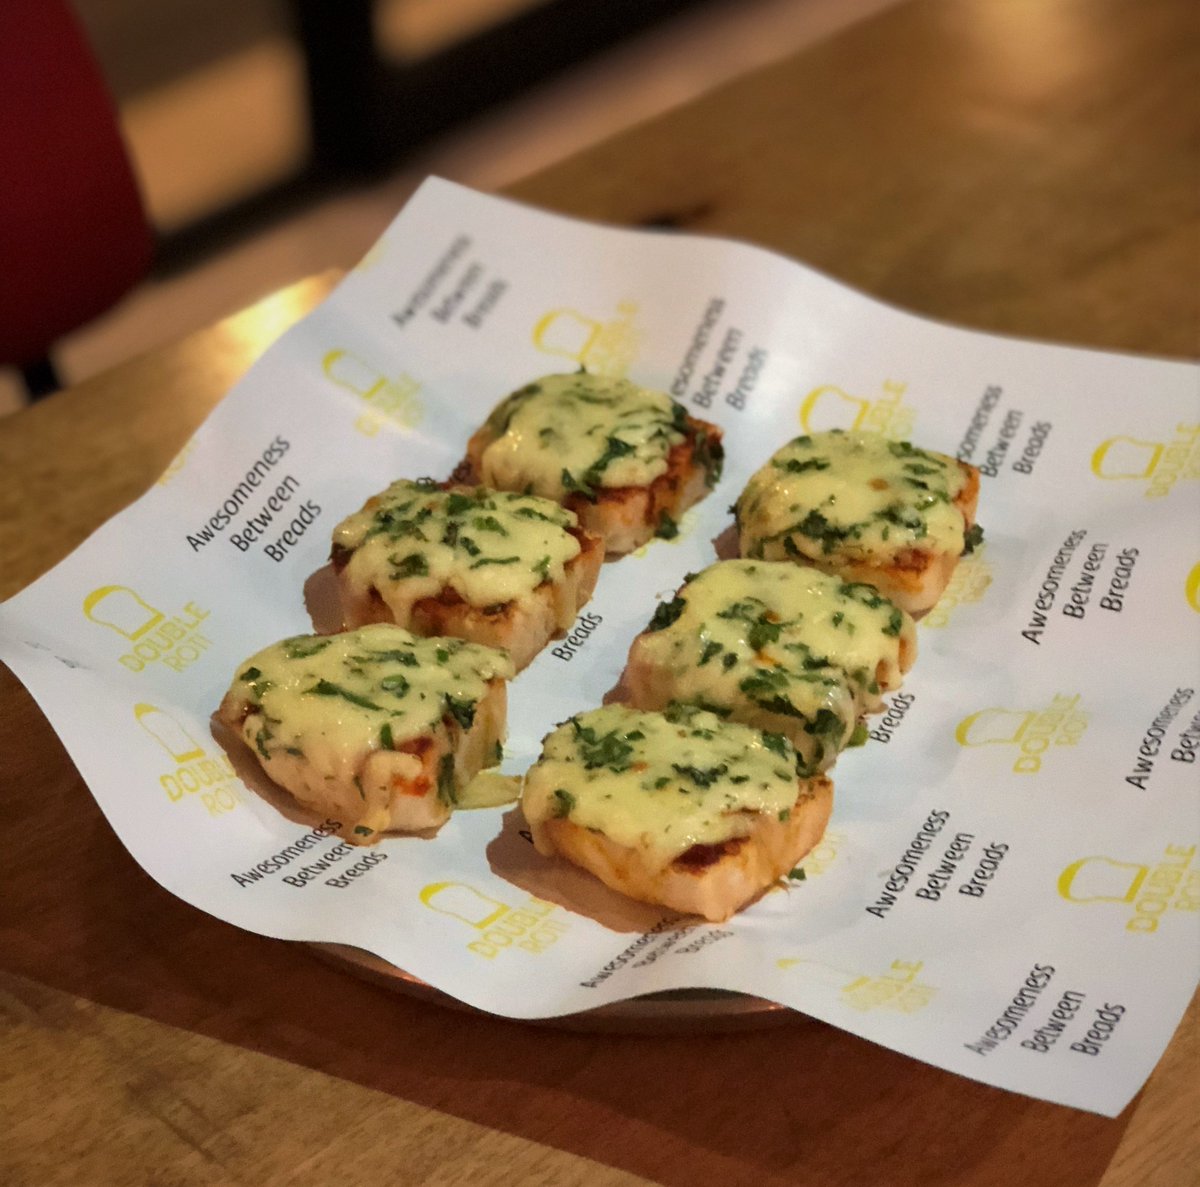 Indeed, when you taste something so cheesy, you will tend to feel on cloud nine.
This Loaded Cheese Chilli Toast is your ultimate go-to for a great start of the meal.

Order this delicacy now & let people's favourite be yours too! #Cheesy #DoubleRoti #Yummy #CheeseChilliToast